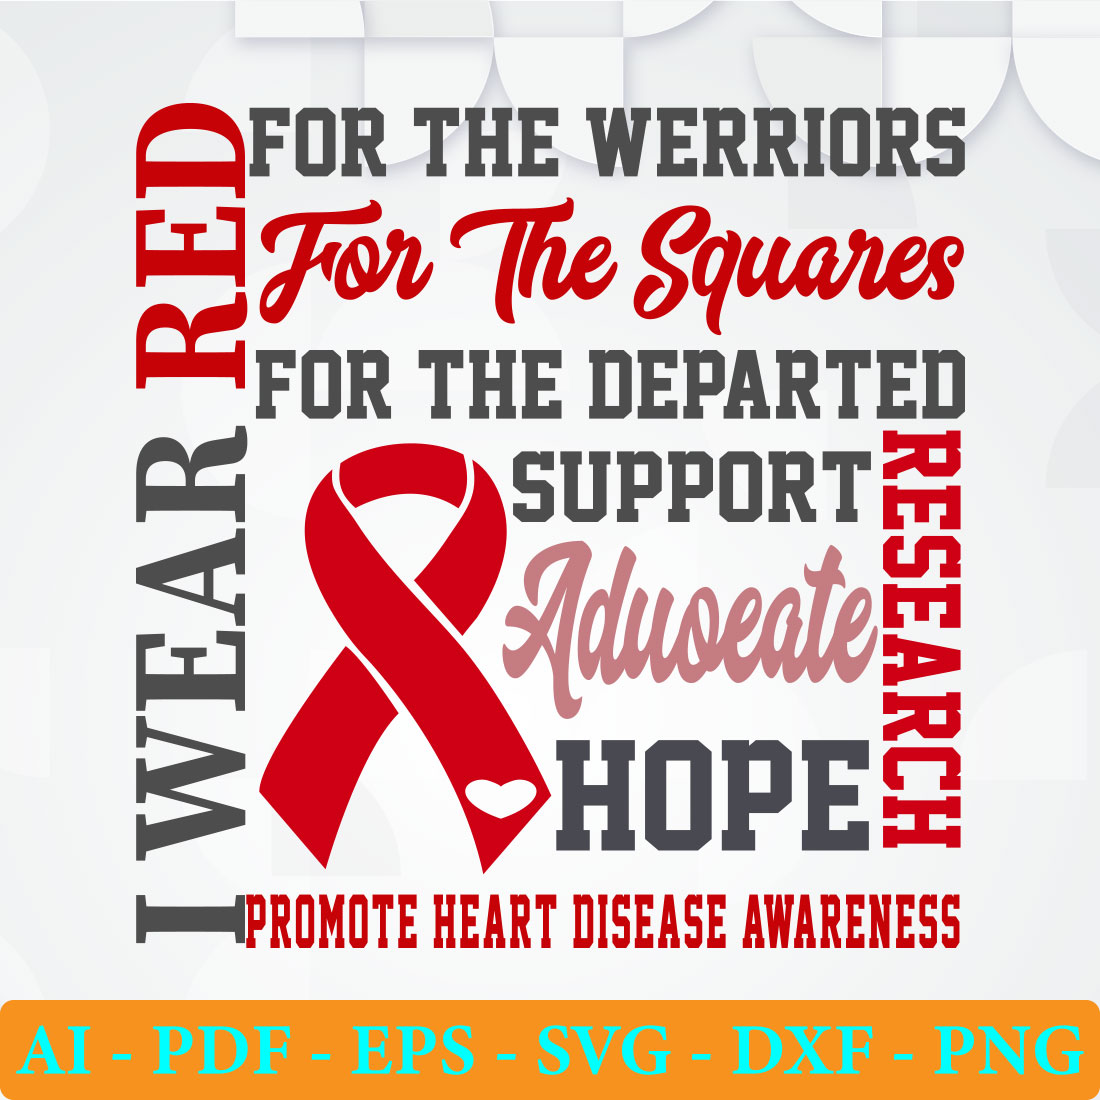 Red ribbon for the warriors for the square.